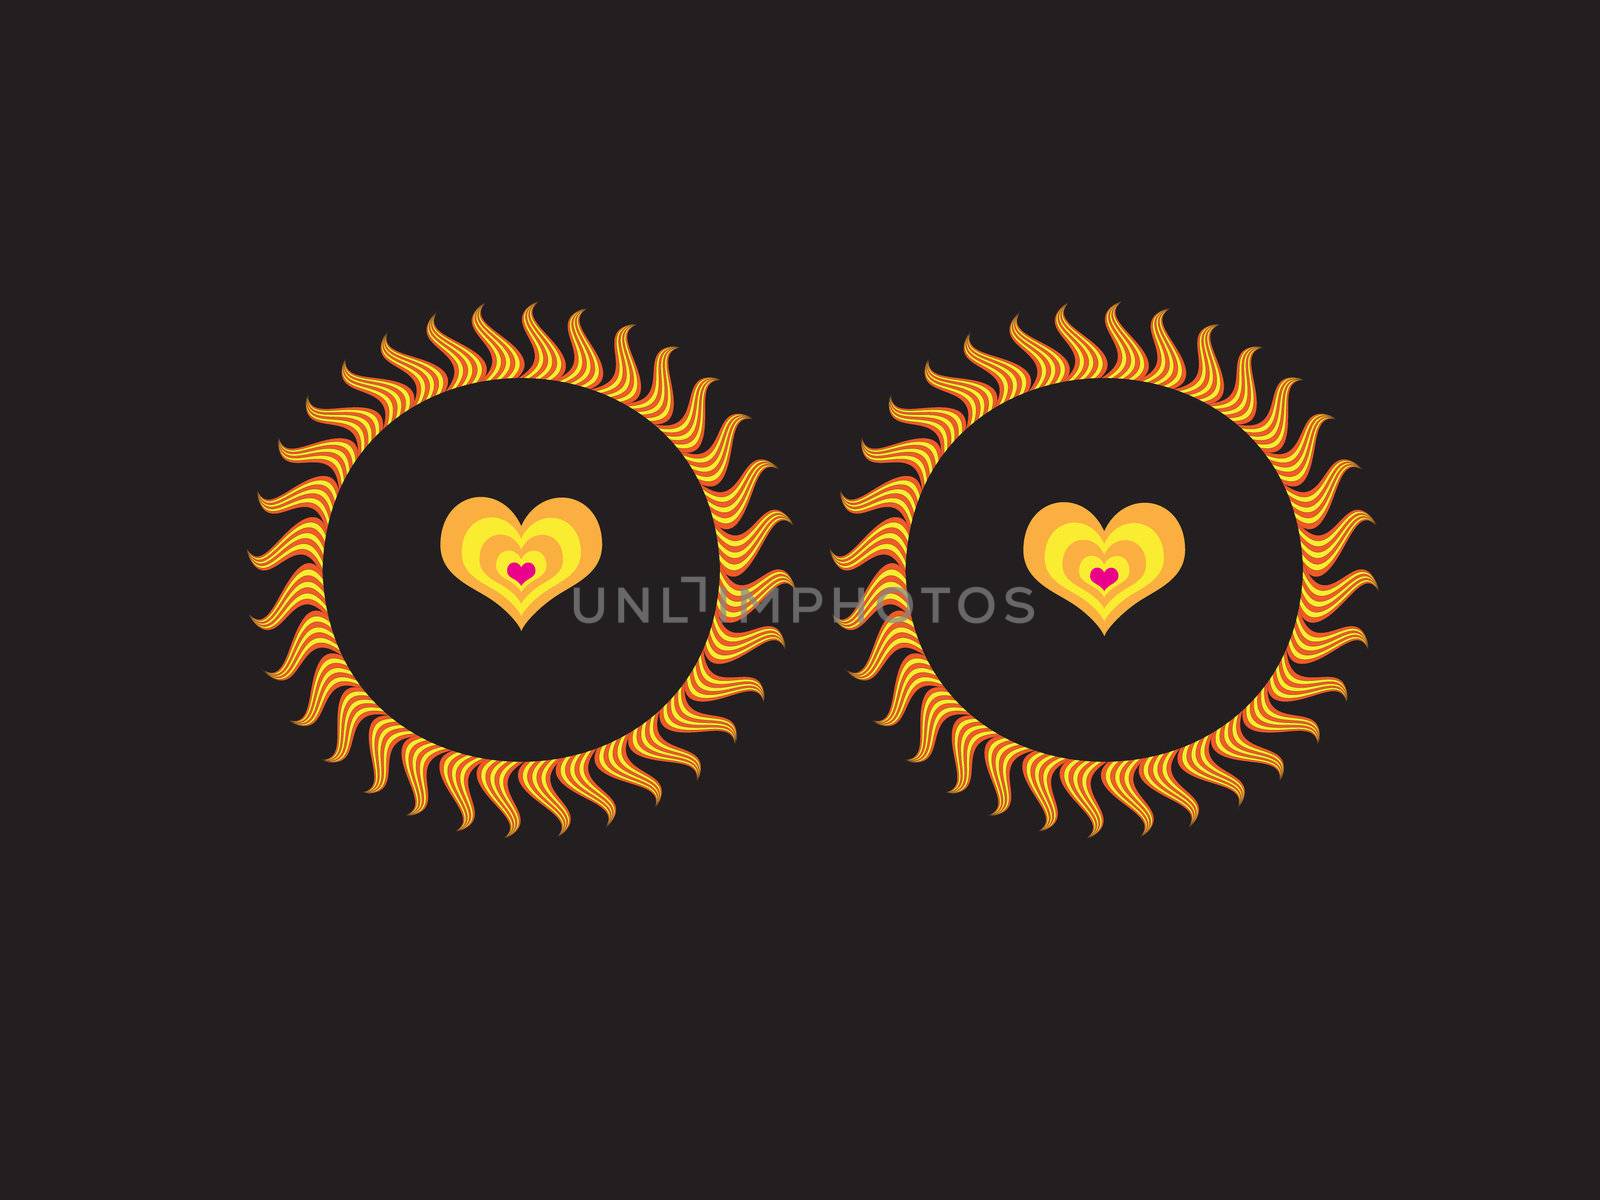 Two suns on the black background